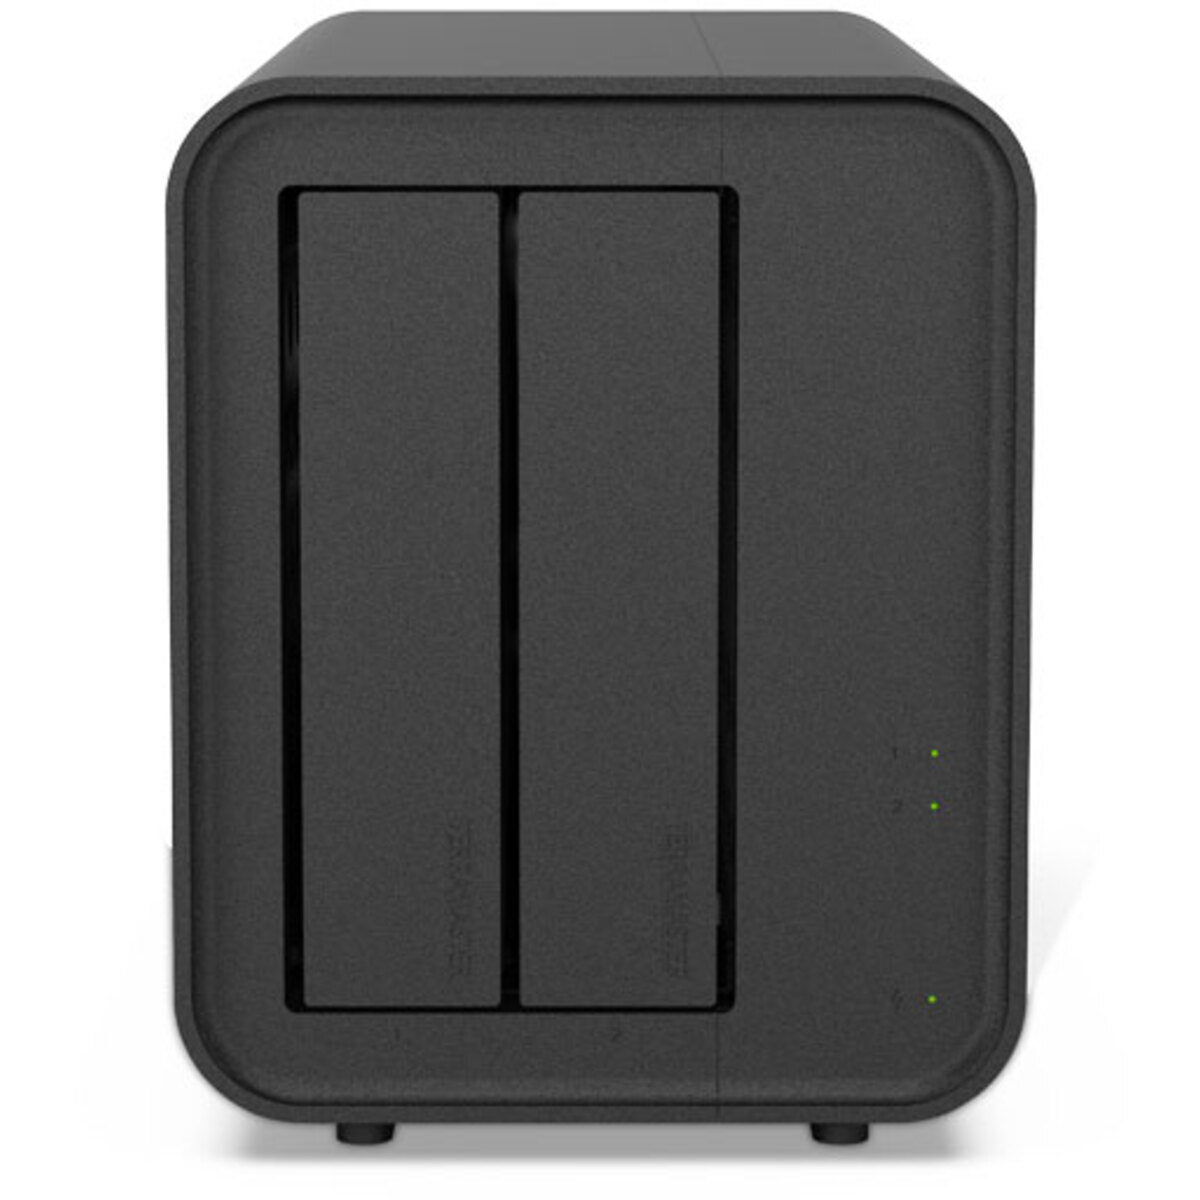 TerraMaster F2-424 32tb 2-Bay Desktop Multimedia / Power User / Business NAS - Network Attached Storage Device 2x16tb Seagate EXOS X18 ST16000NM000J 3.5 7200rpm SATA 6Gb/s HDD ENTERPRISE Class Drives Installed - Burn-In Tested F2-424